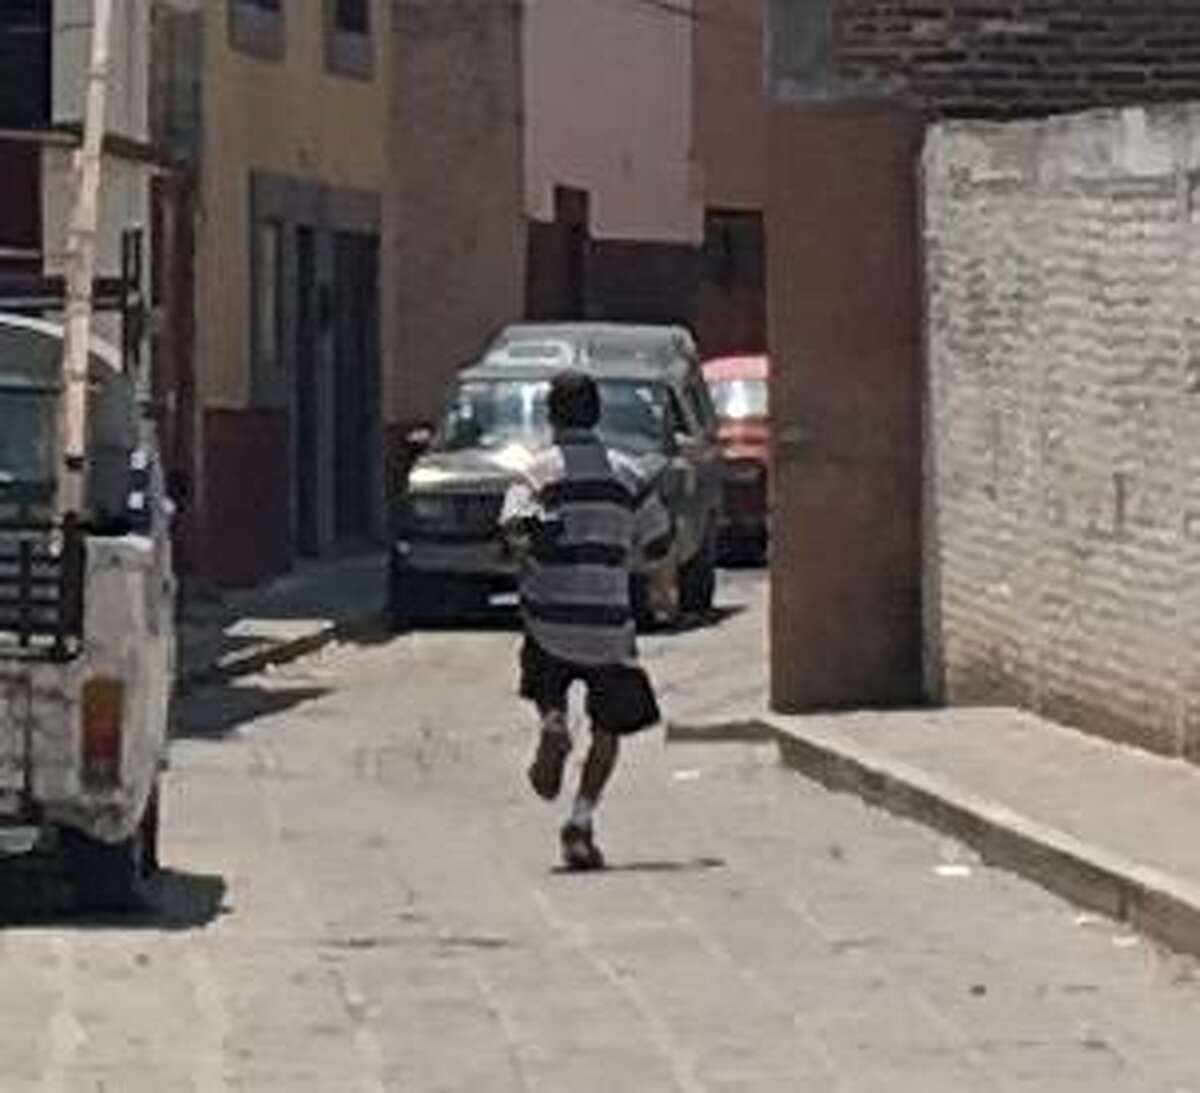 When Dwight Silverman's phone was stolen in 2017 in San Miguel de Allende, Mexico, his wife ised her iPhone to snap this photo of the thief as he sprinted away.